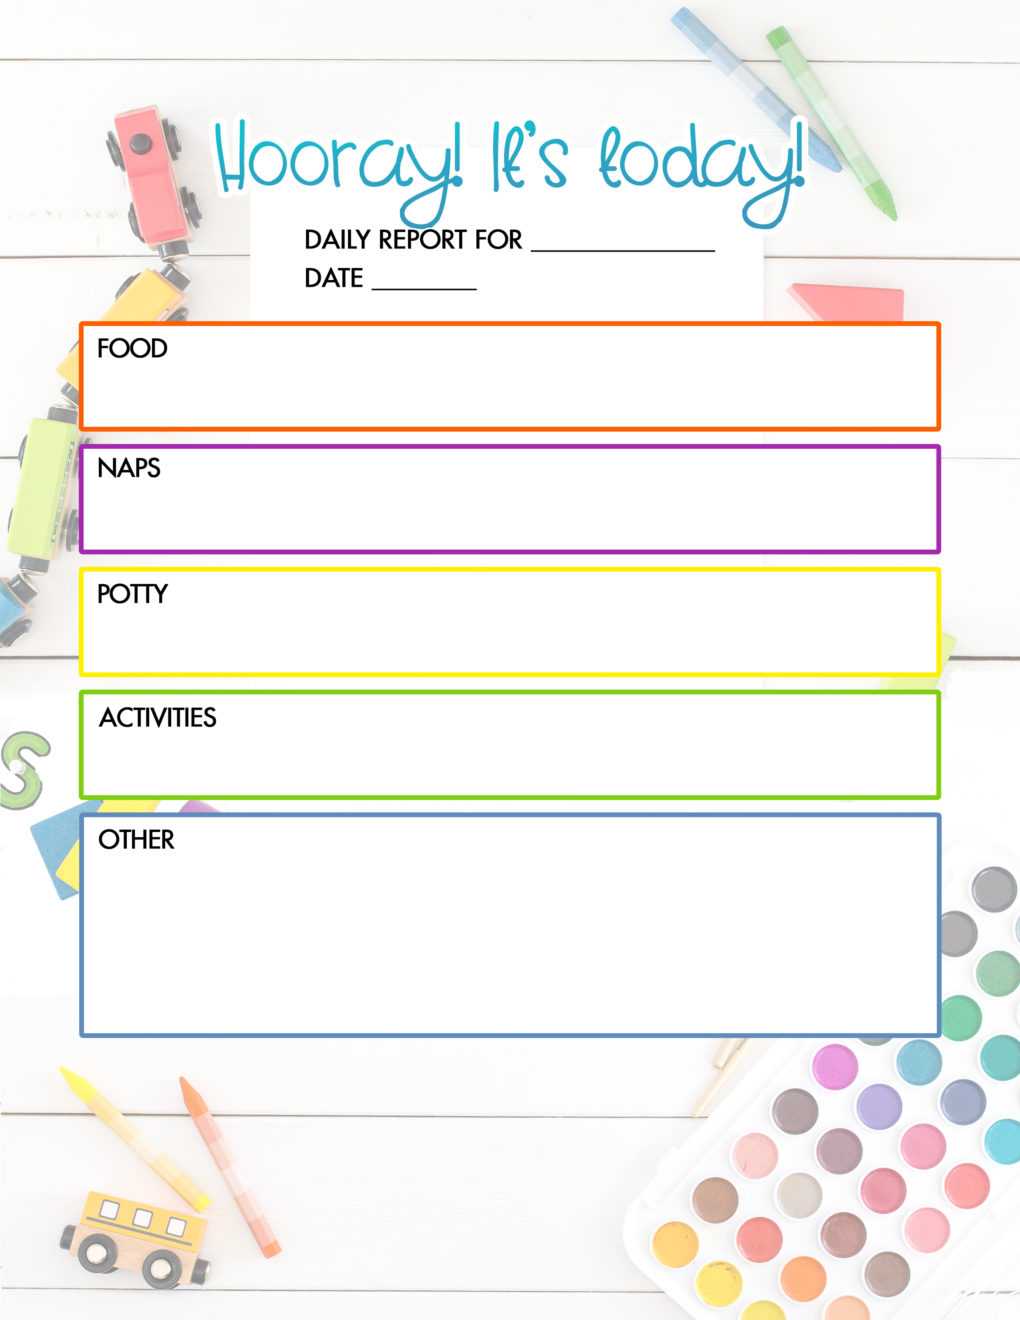 Free Daycare Daily Report | Child Care Printable – The Diy Within Daycare Infant Daily Report Template